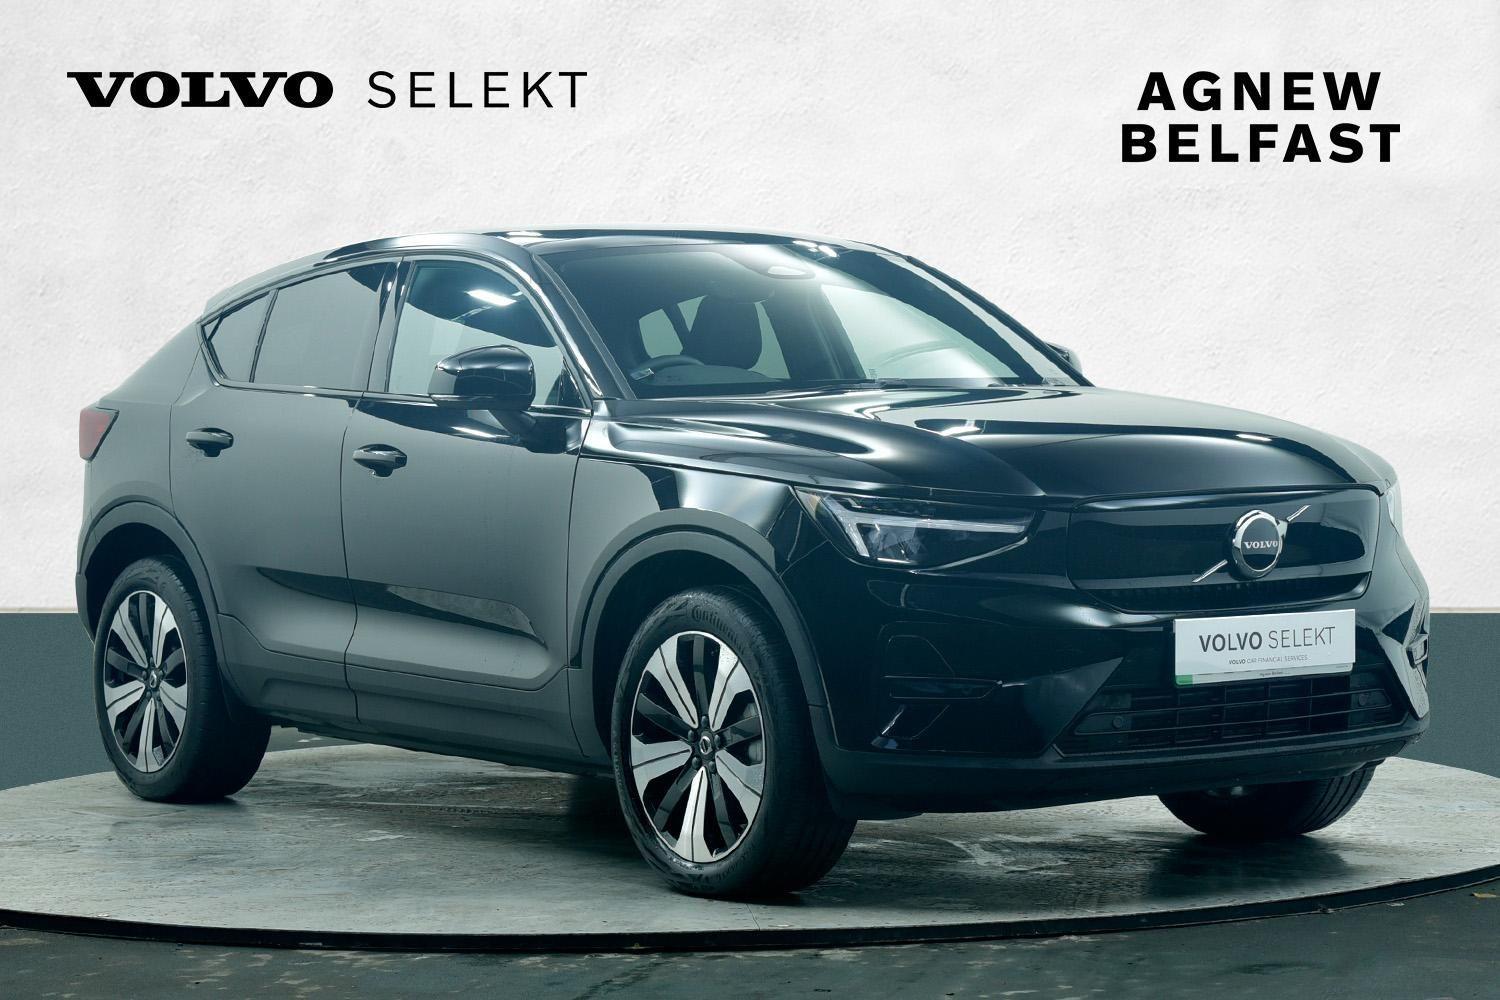 Used Volvo Selekt Volvo C40 Core (in black) available for purchase at Agnew Volvo Belfast